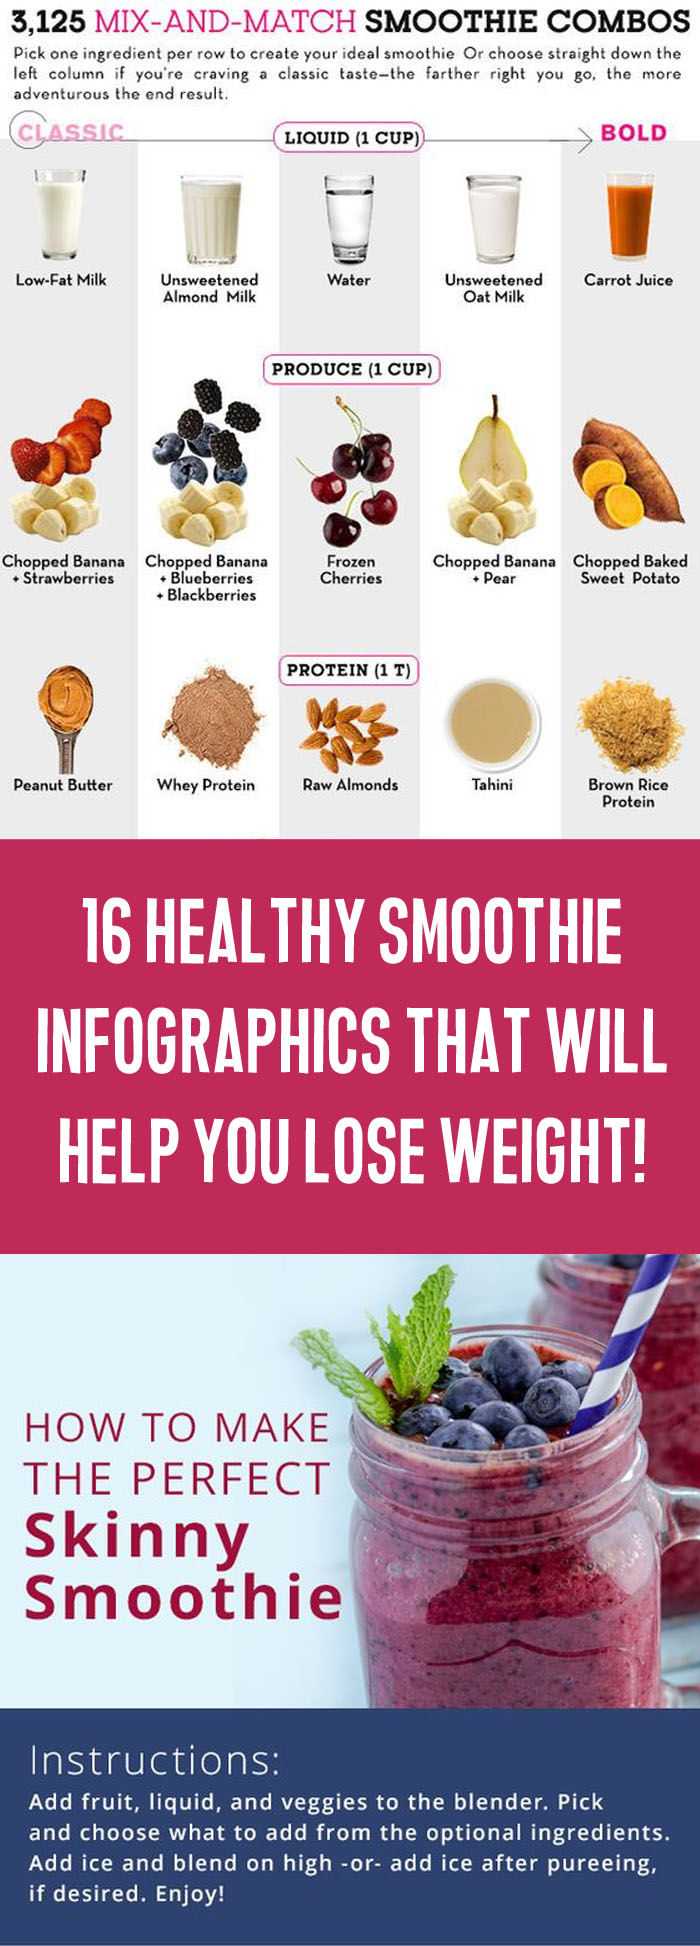 16 Healthy Smoothie Infographics That Will Help You Lose Weight Fast! -  TrimmedandToned